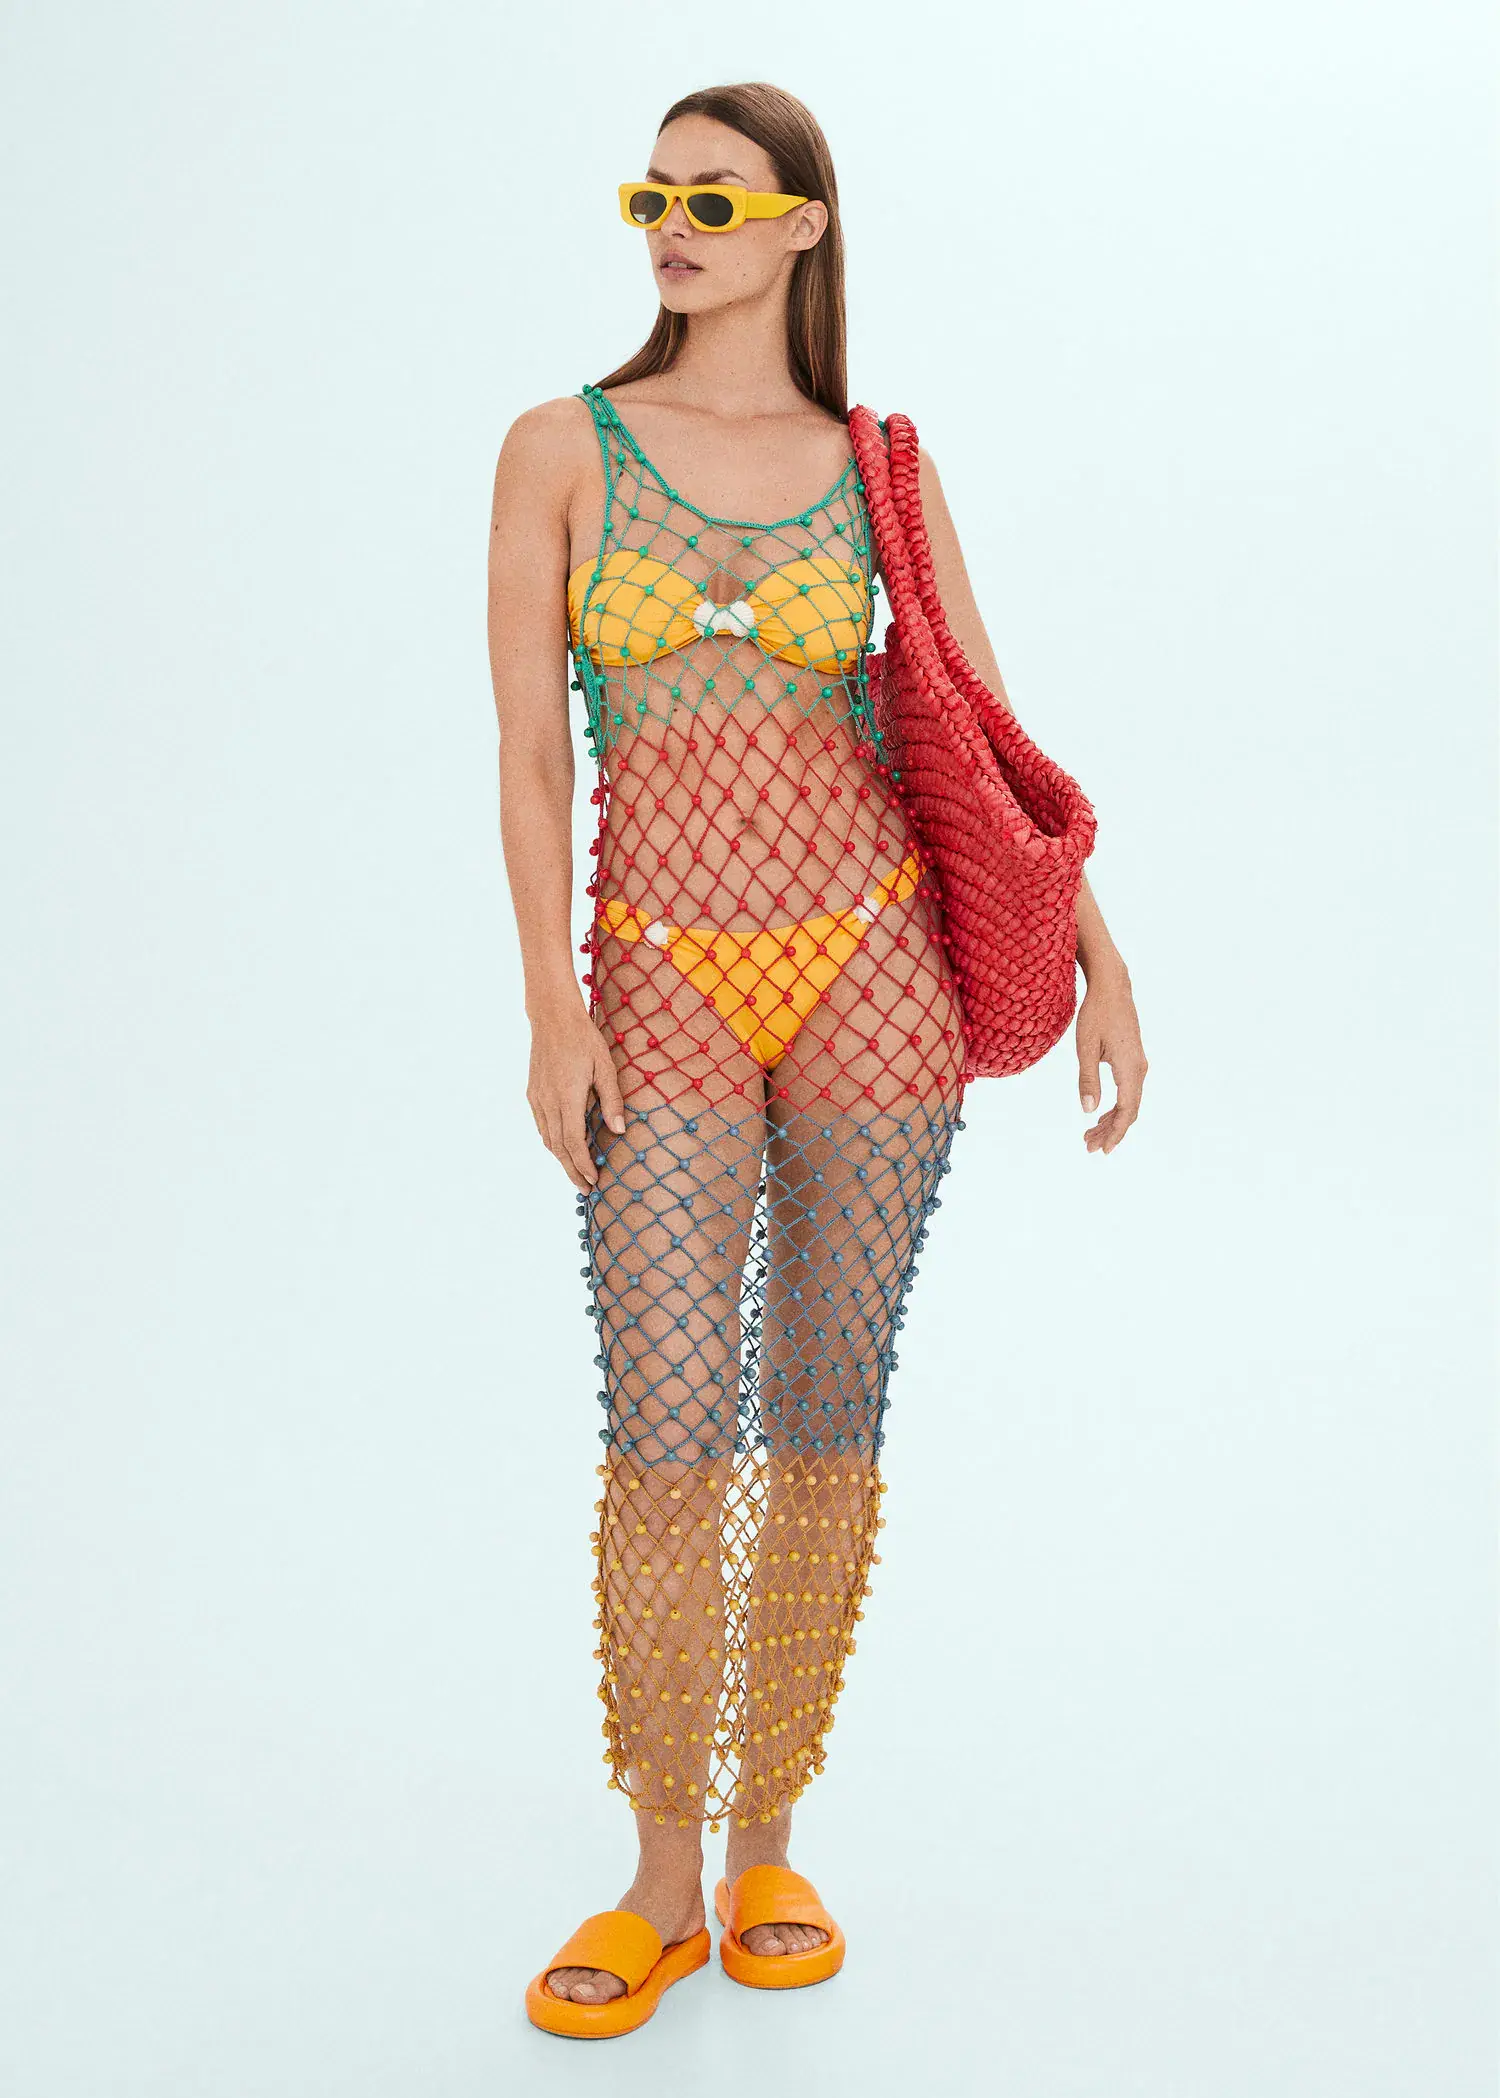 Mango Multi-colored net dress with beads. a woman in a colorful bikini and fishnet suit. 